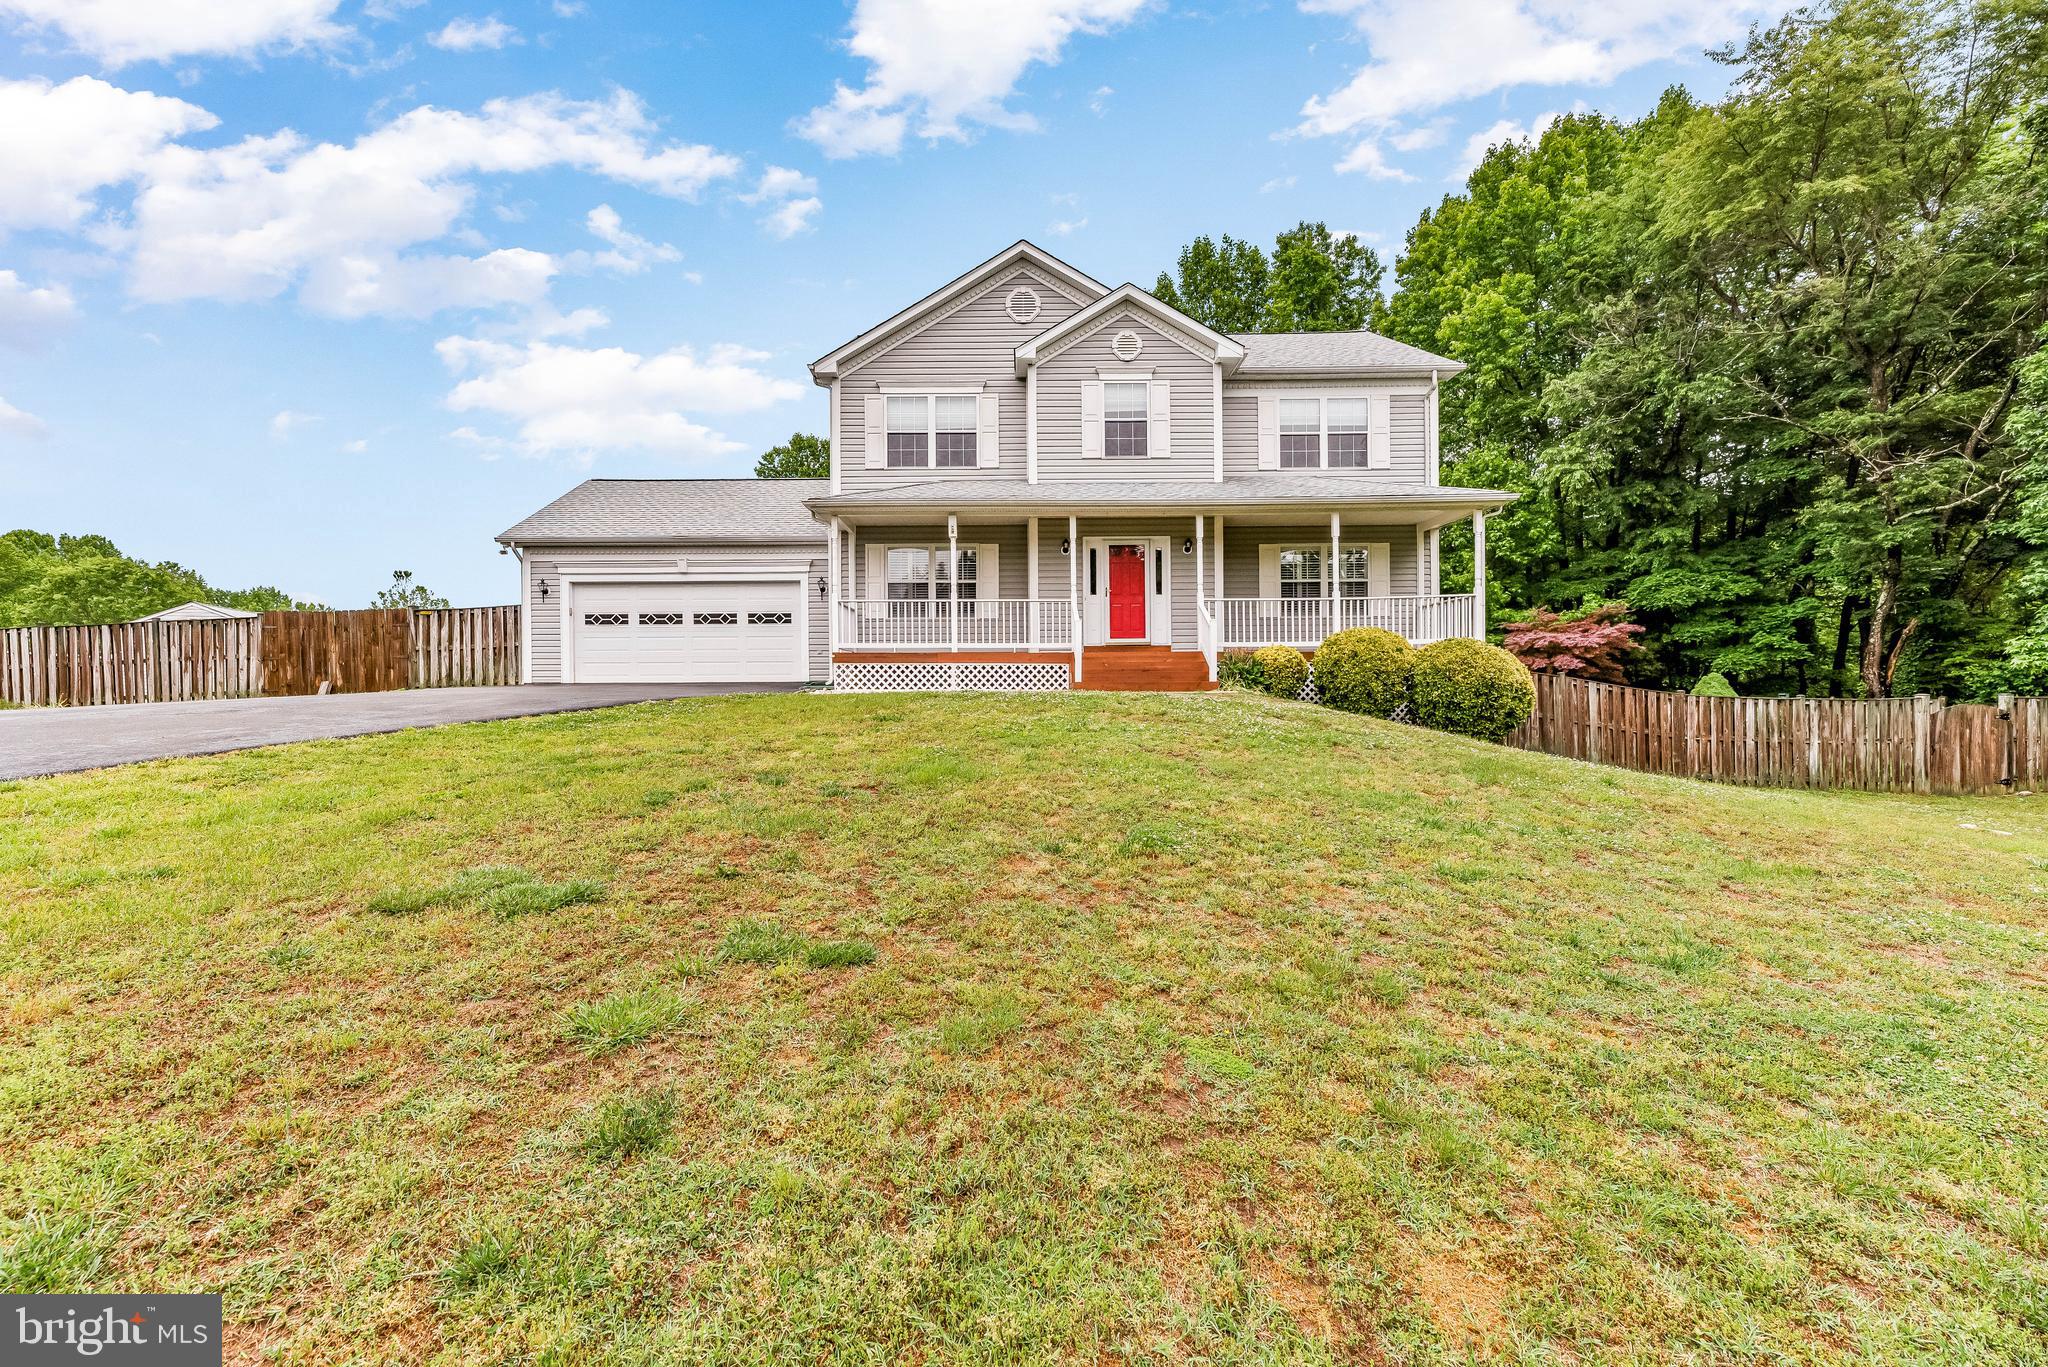 Welcome to this move-in ready 5-bedroom, 3.5-bath home situated on a prime lot in northern Calvert. 